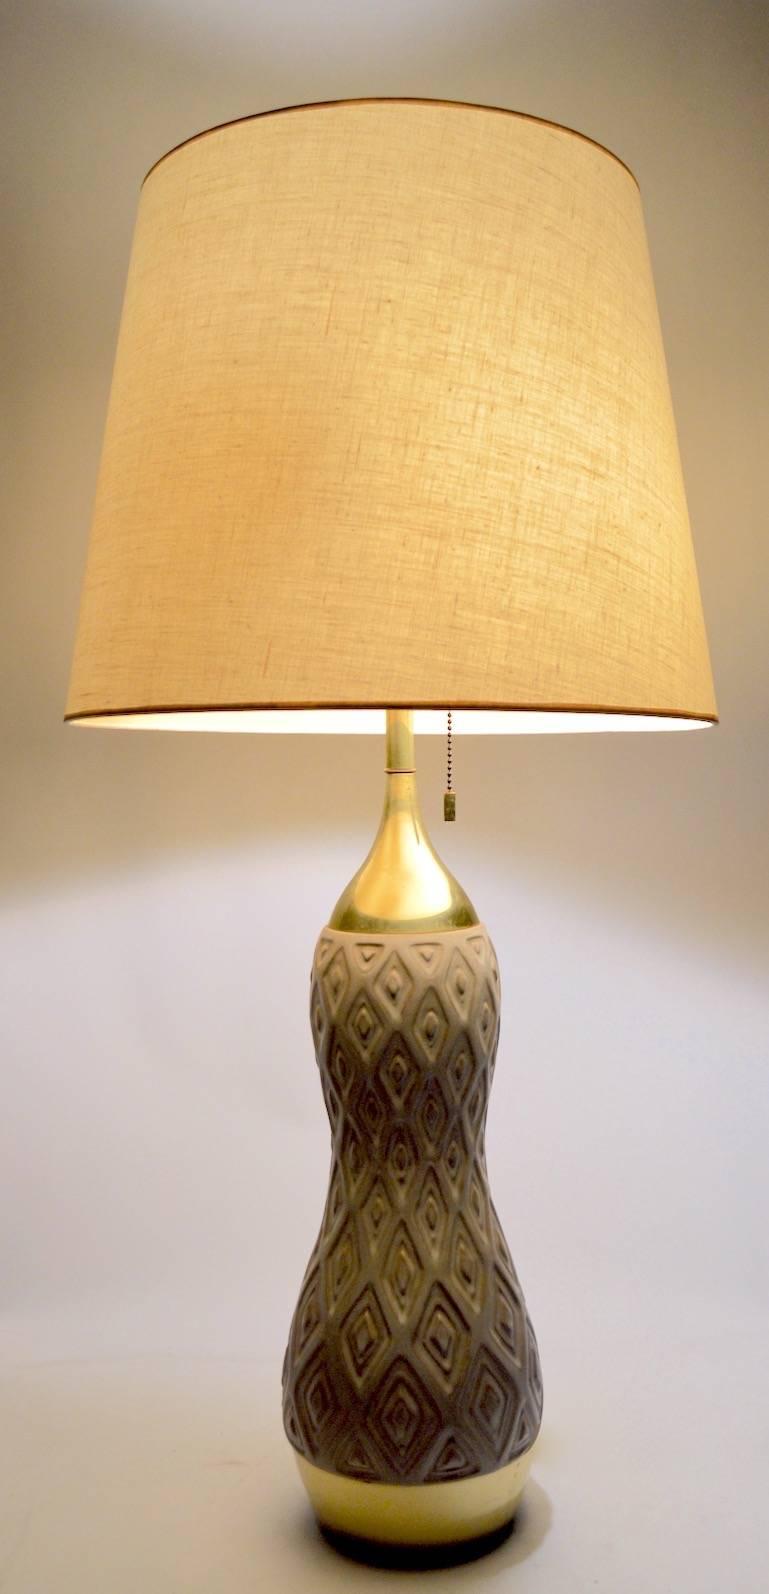 Gerald Thurston for Lightolier Ceramic and Brass Table Lamp For Sale 4